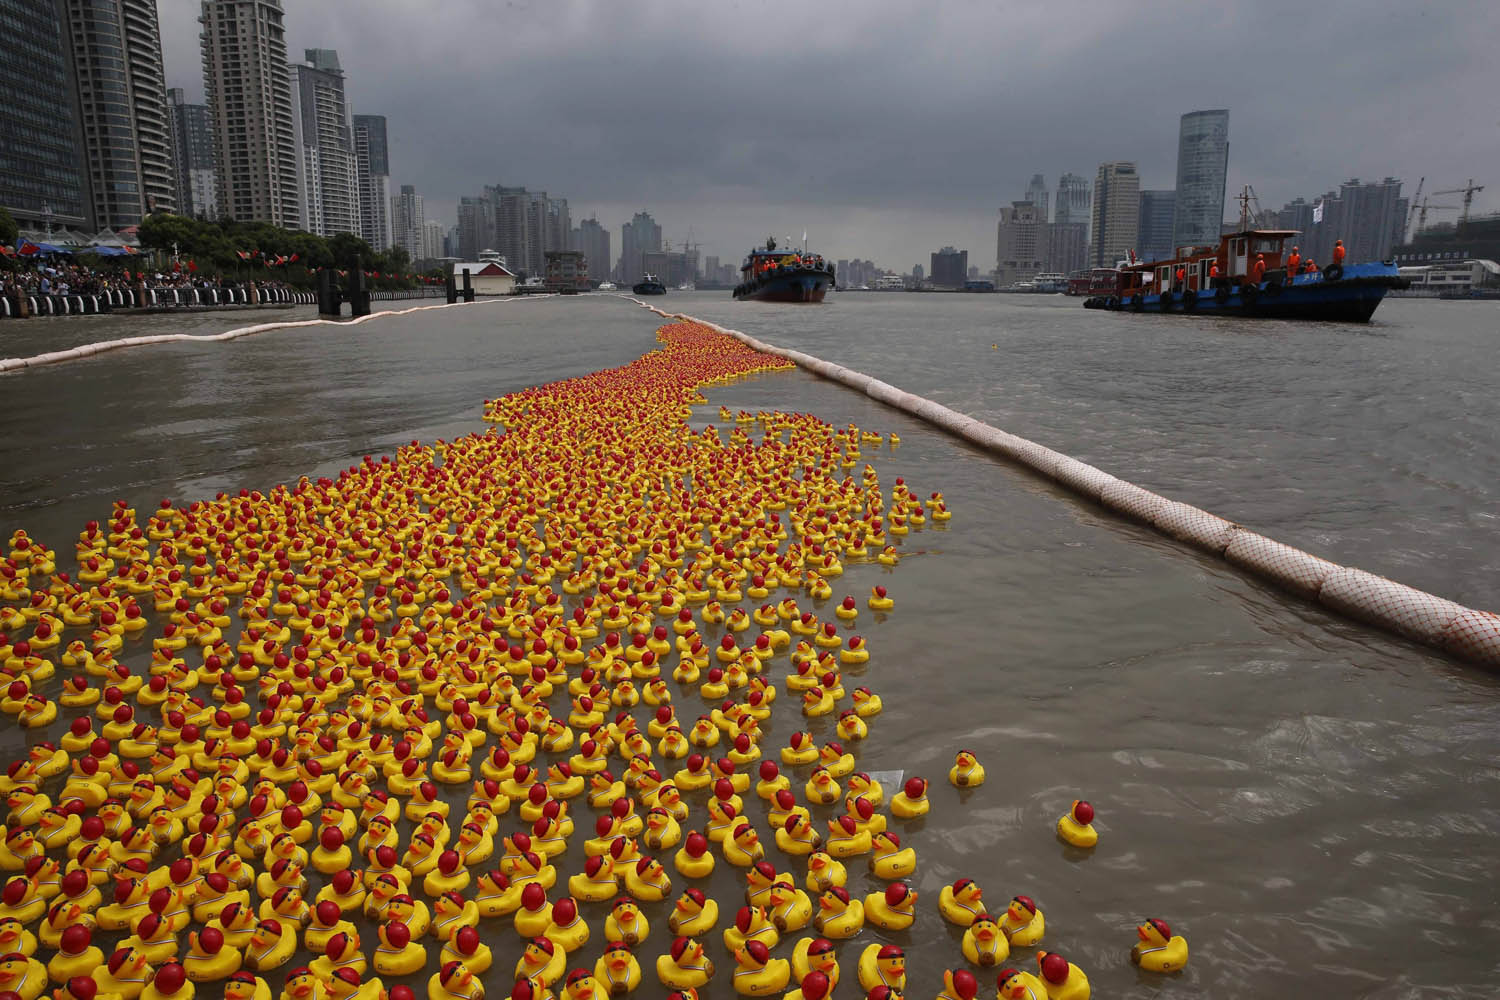 Over 10,000 rubber ducks drifted down Huangpu River for a charity race in China.